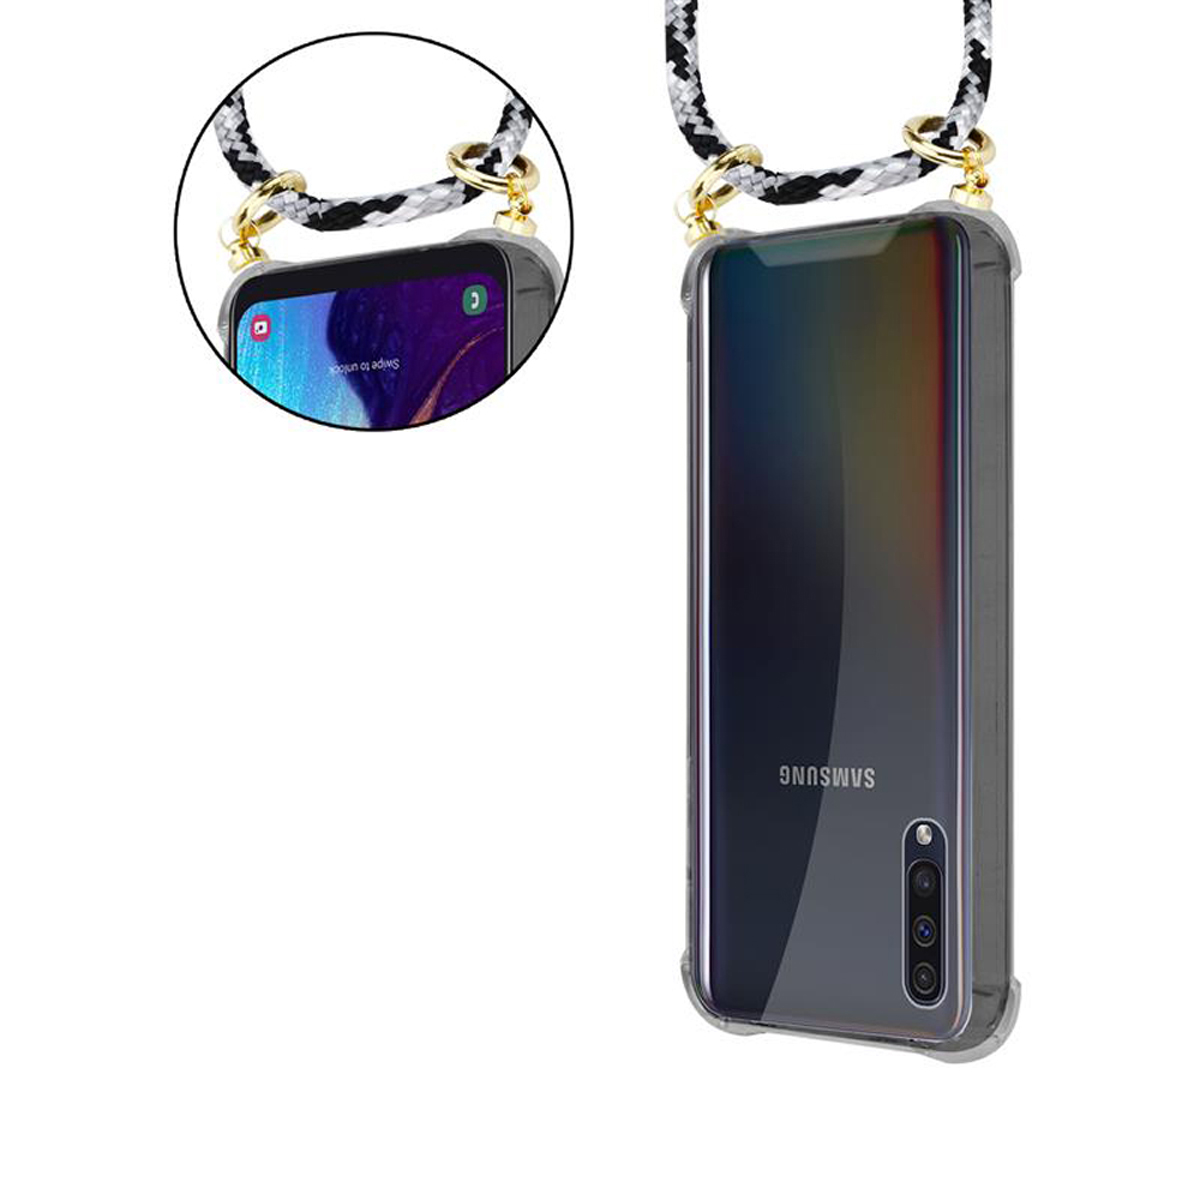 CADORABO Handy Kette mit / Hülle, Kordel Band Samsung, abnehmbarer A30s, Gold / Backcover, 4G Galaxy A50 und SCHWARZ Ringen, A50s CAMOUFLAGE